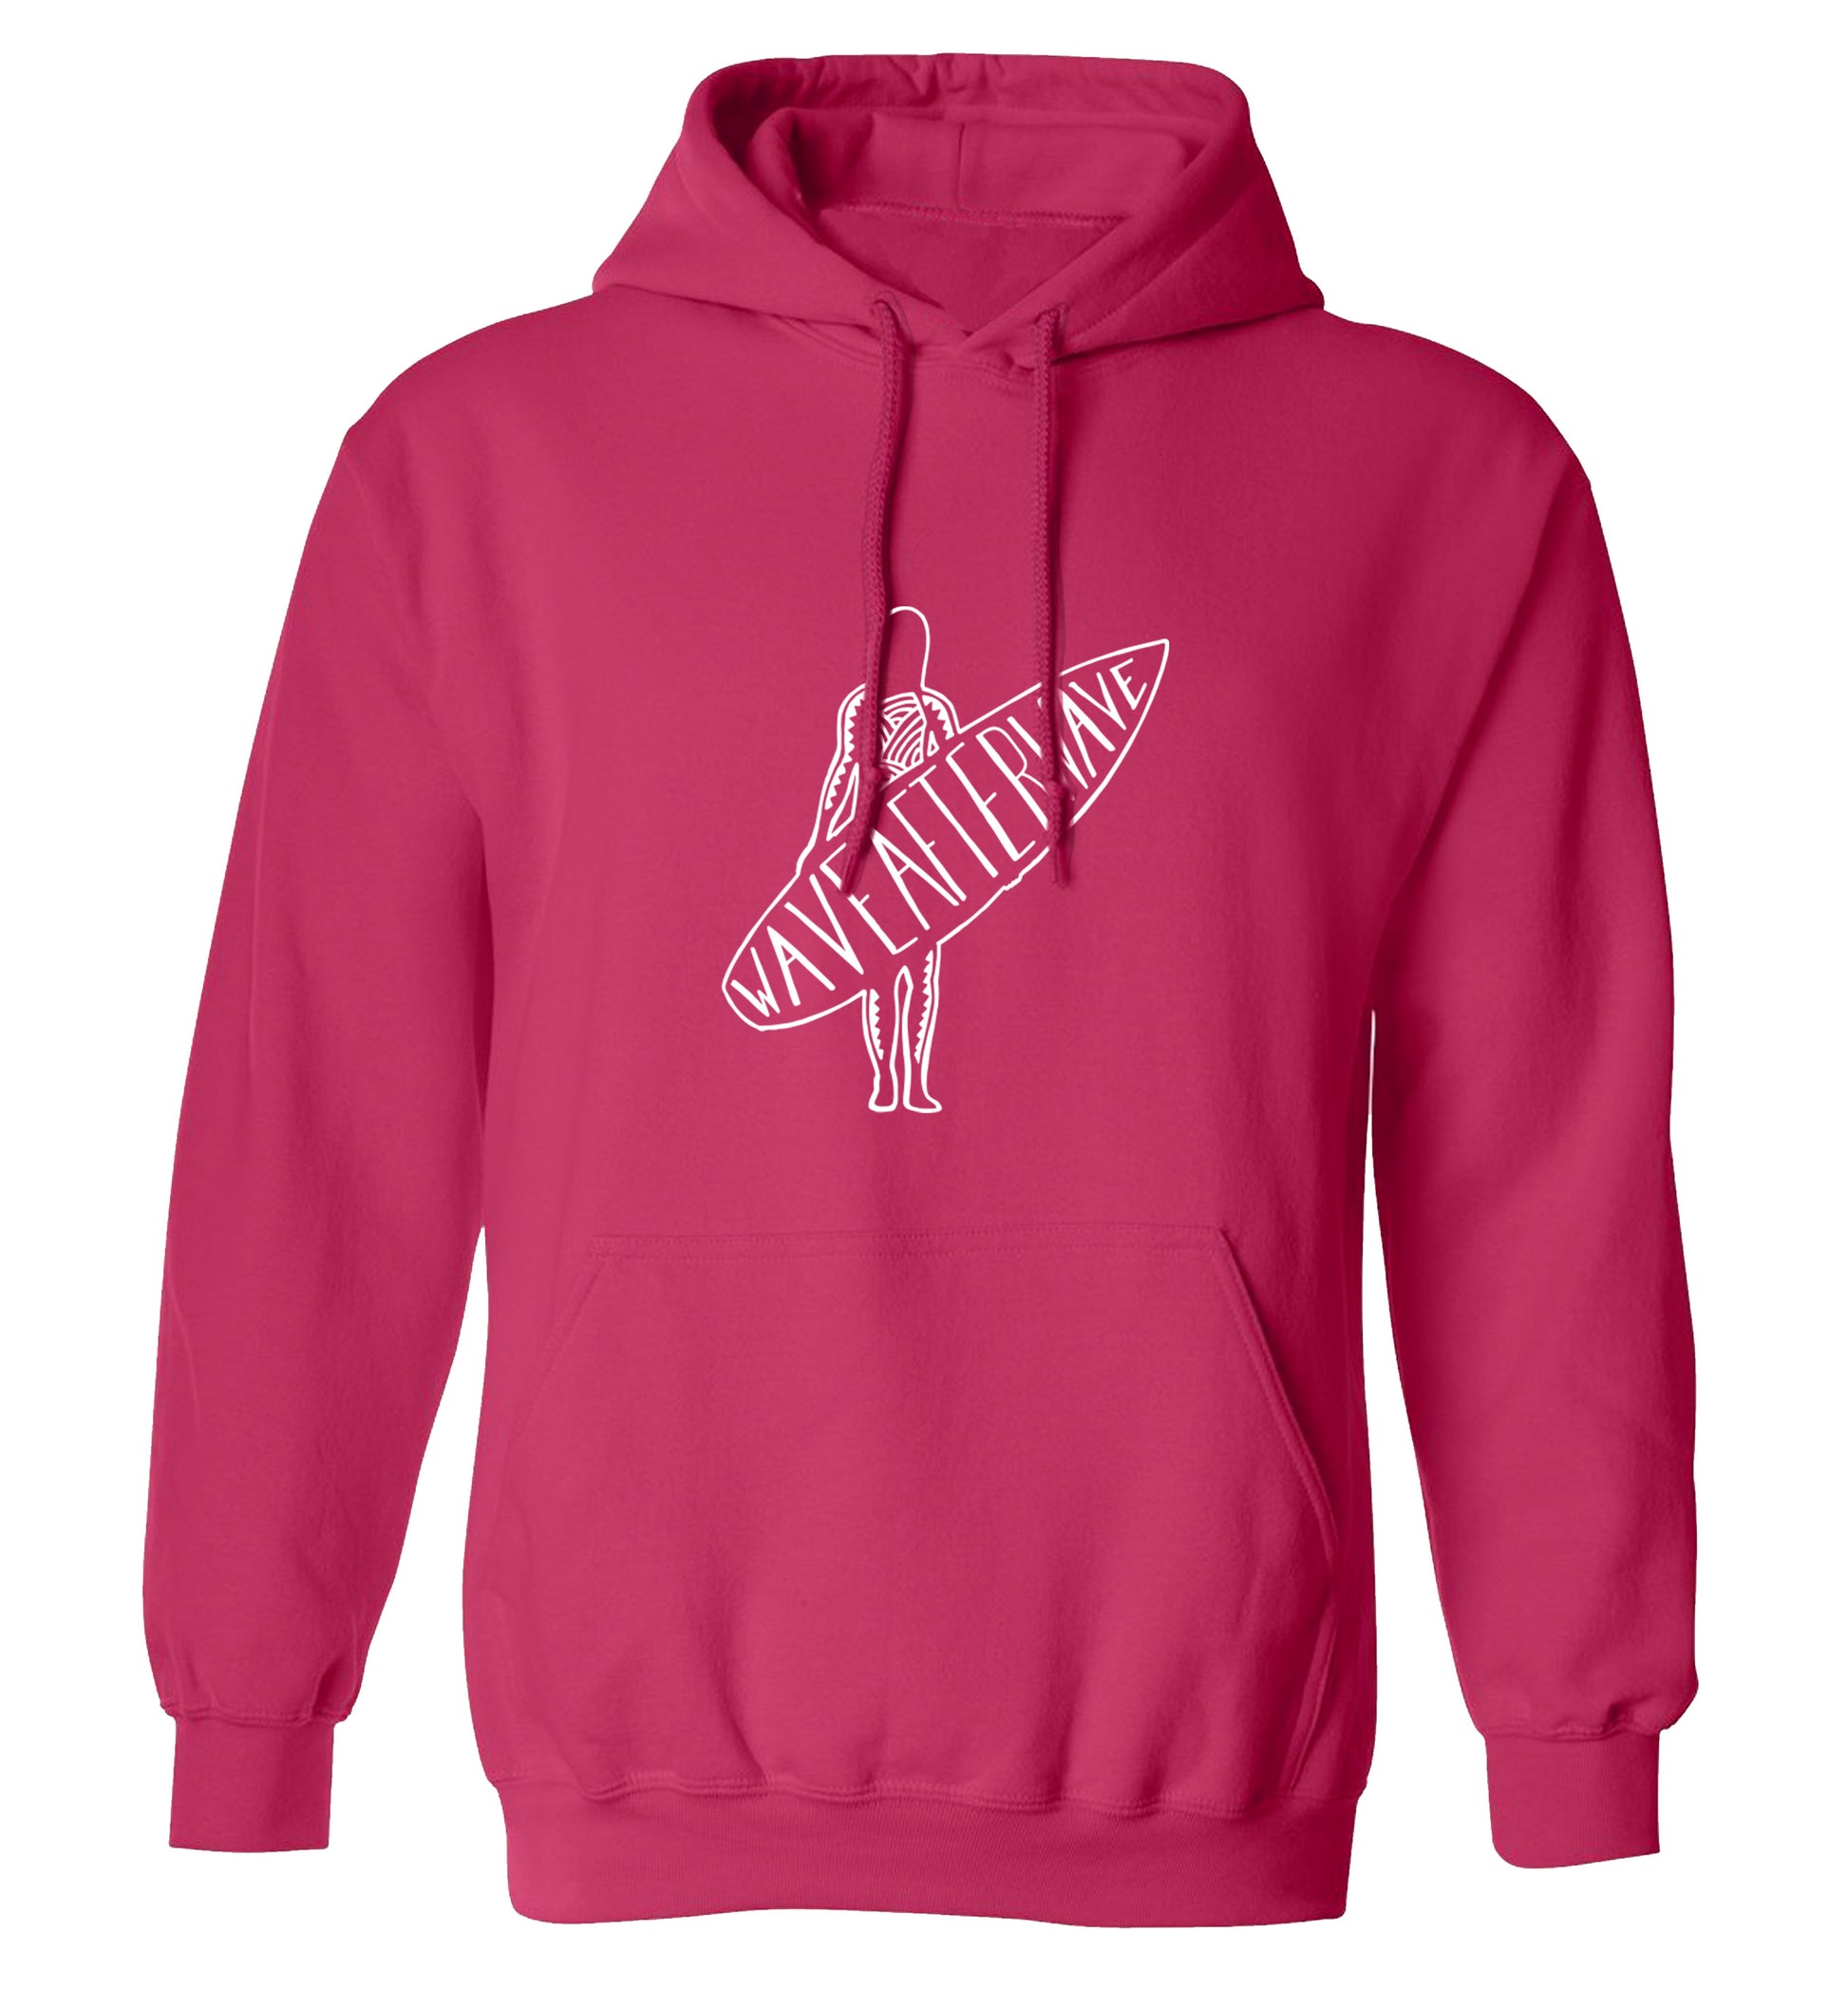 Wave after wave adults unisex pink hoodie 2XL